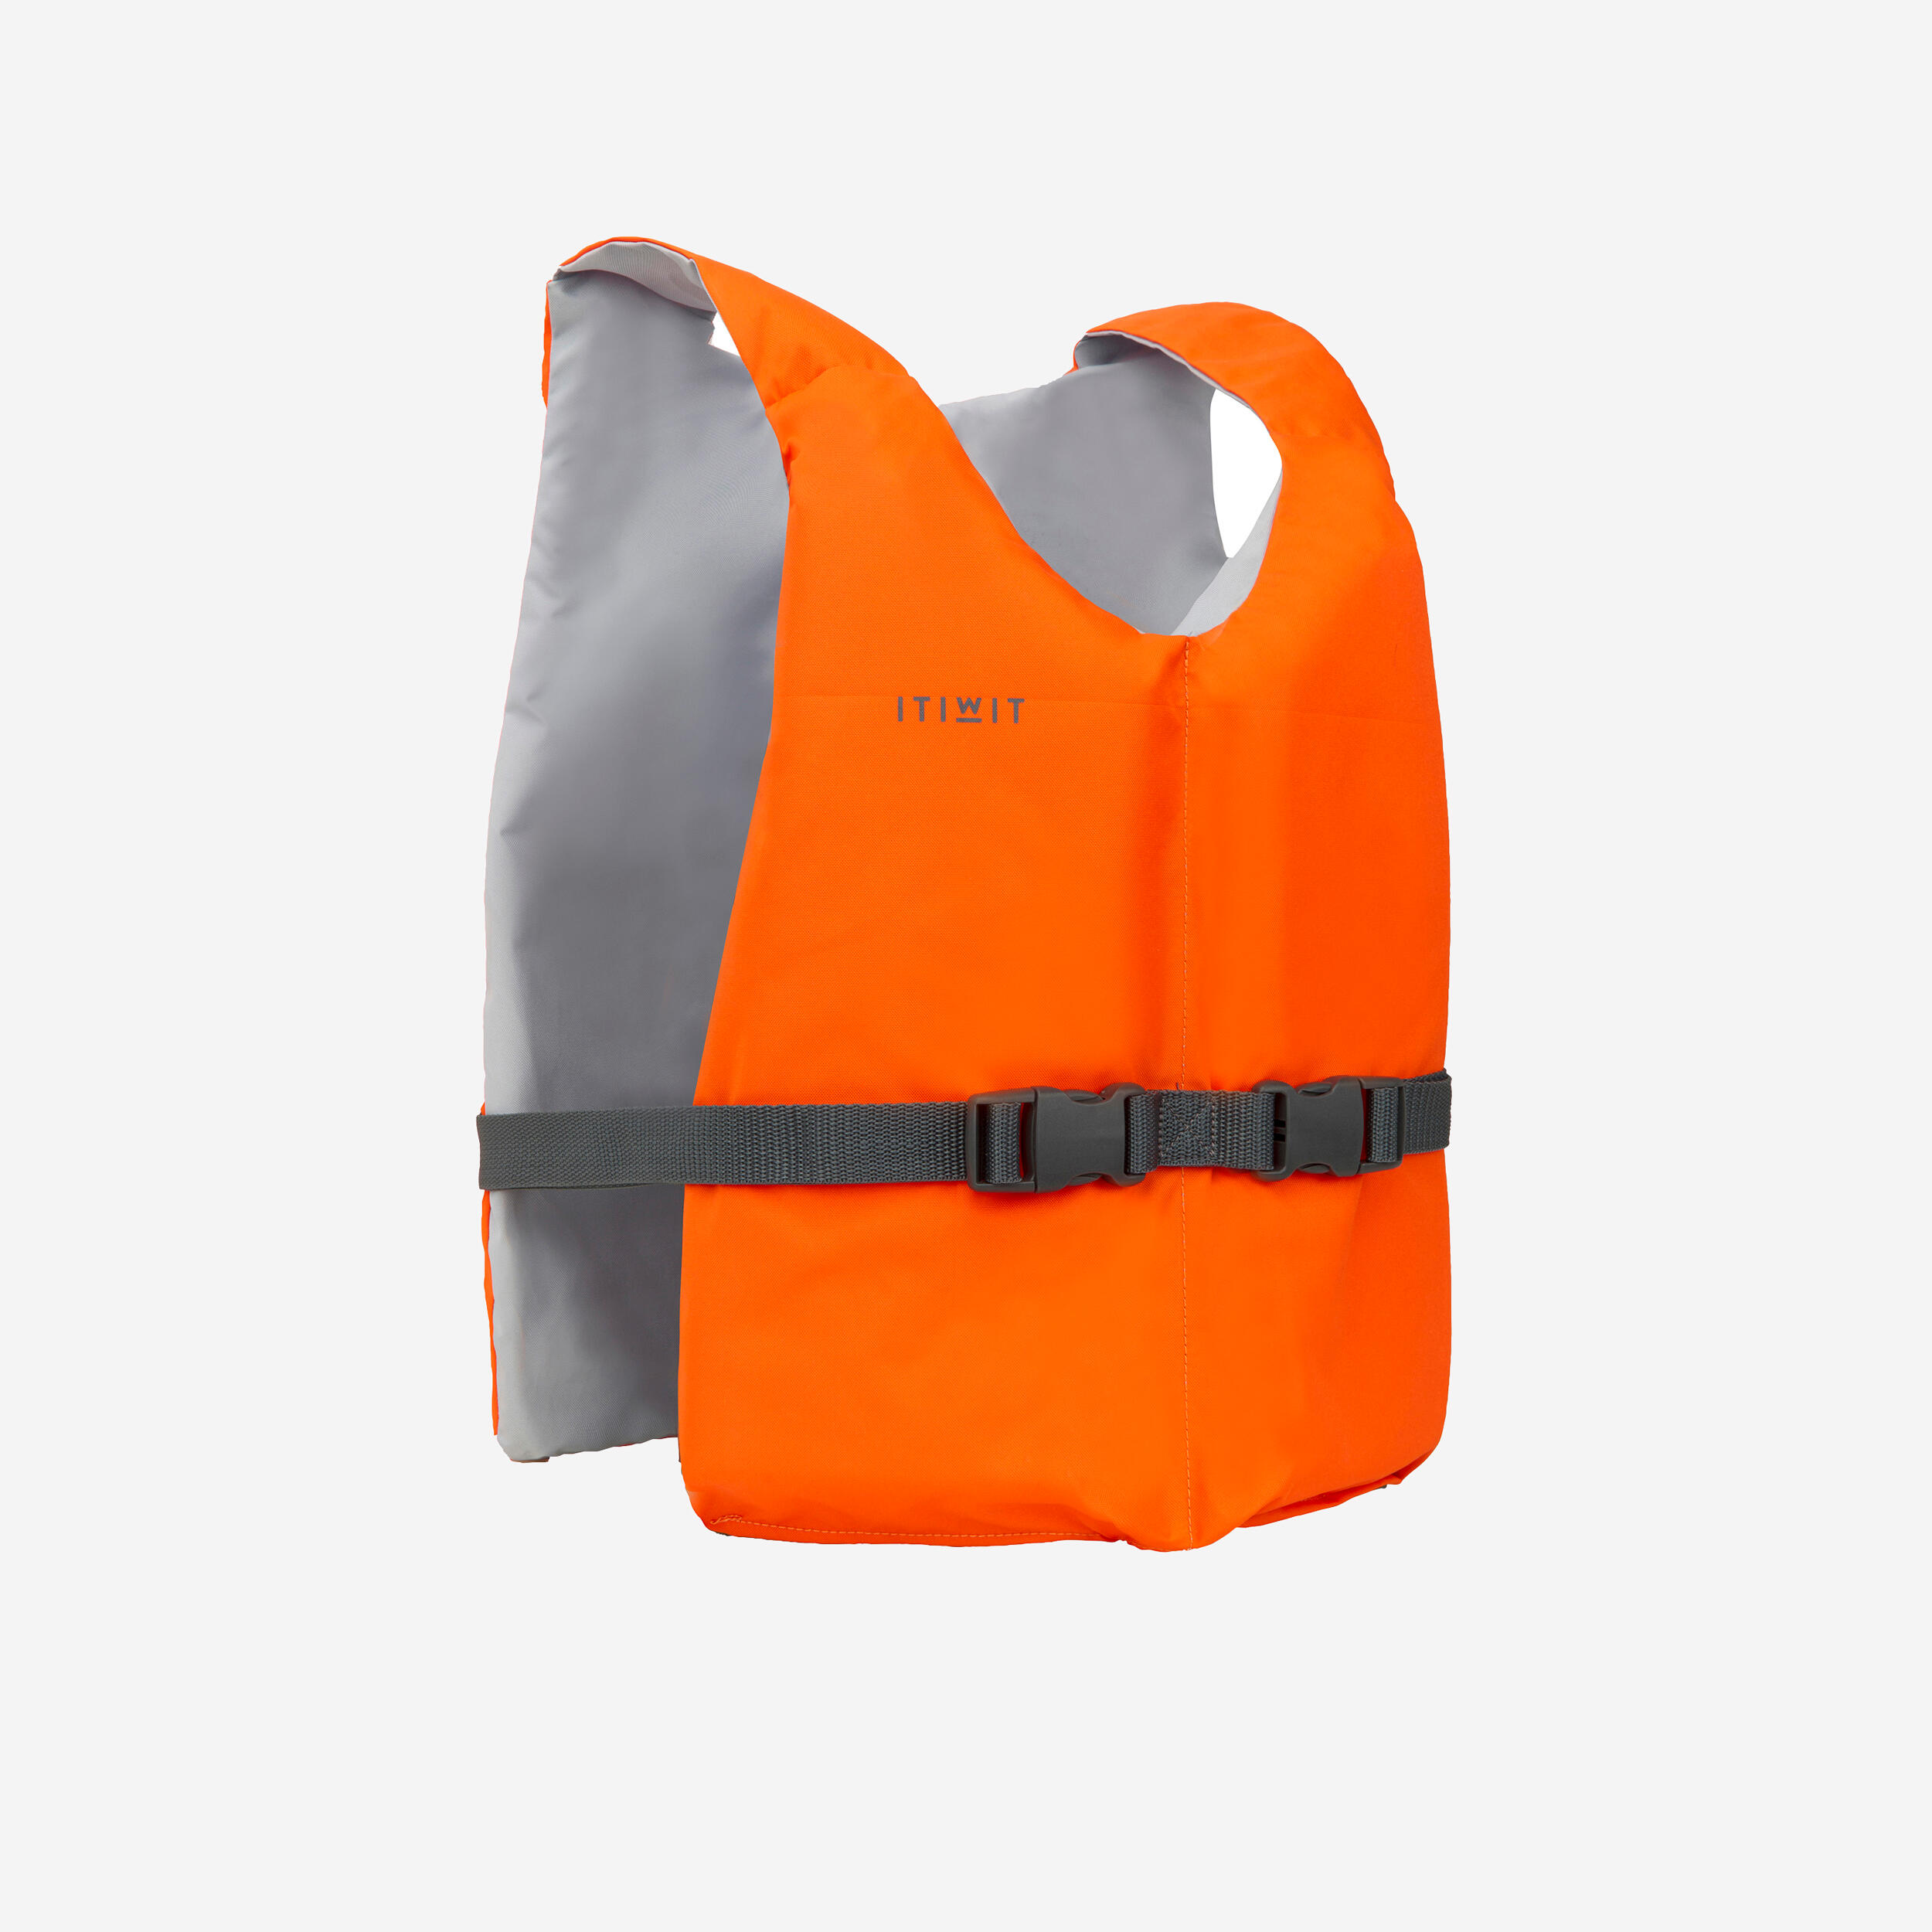 ITIWIT BA 50N Newtons DTC Kayak, Stand Up Paddle or Dinghy Life Vest